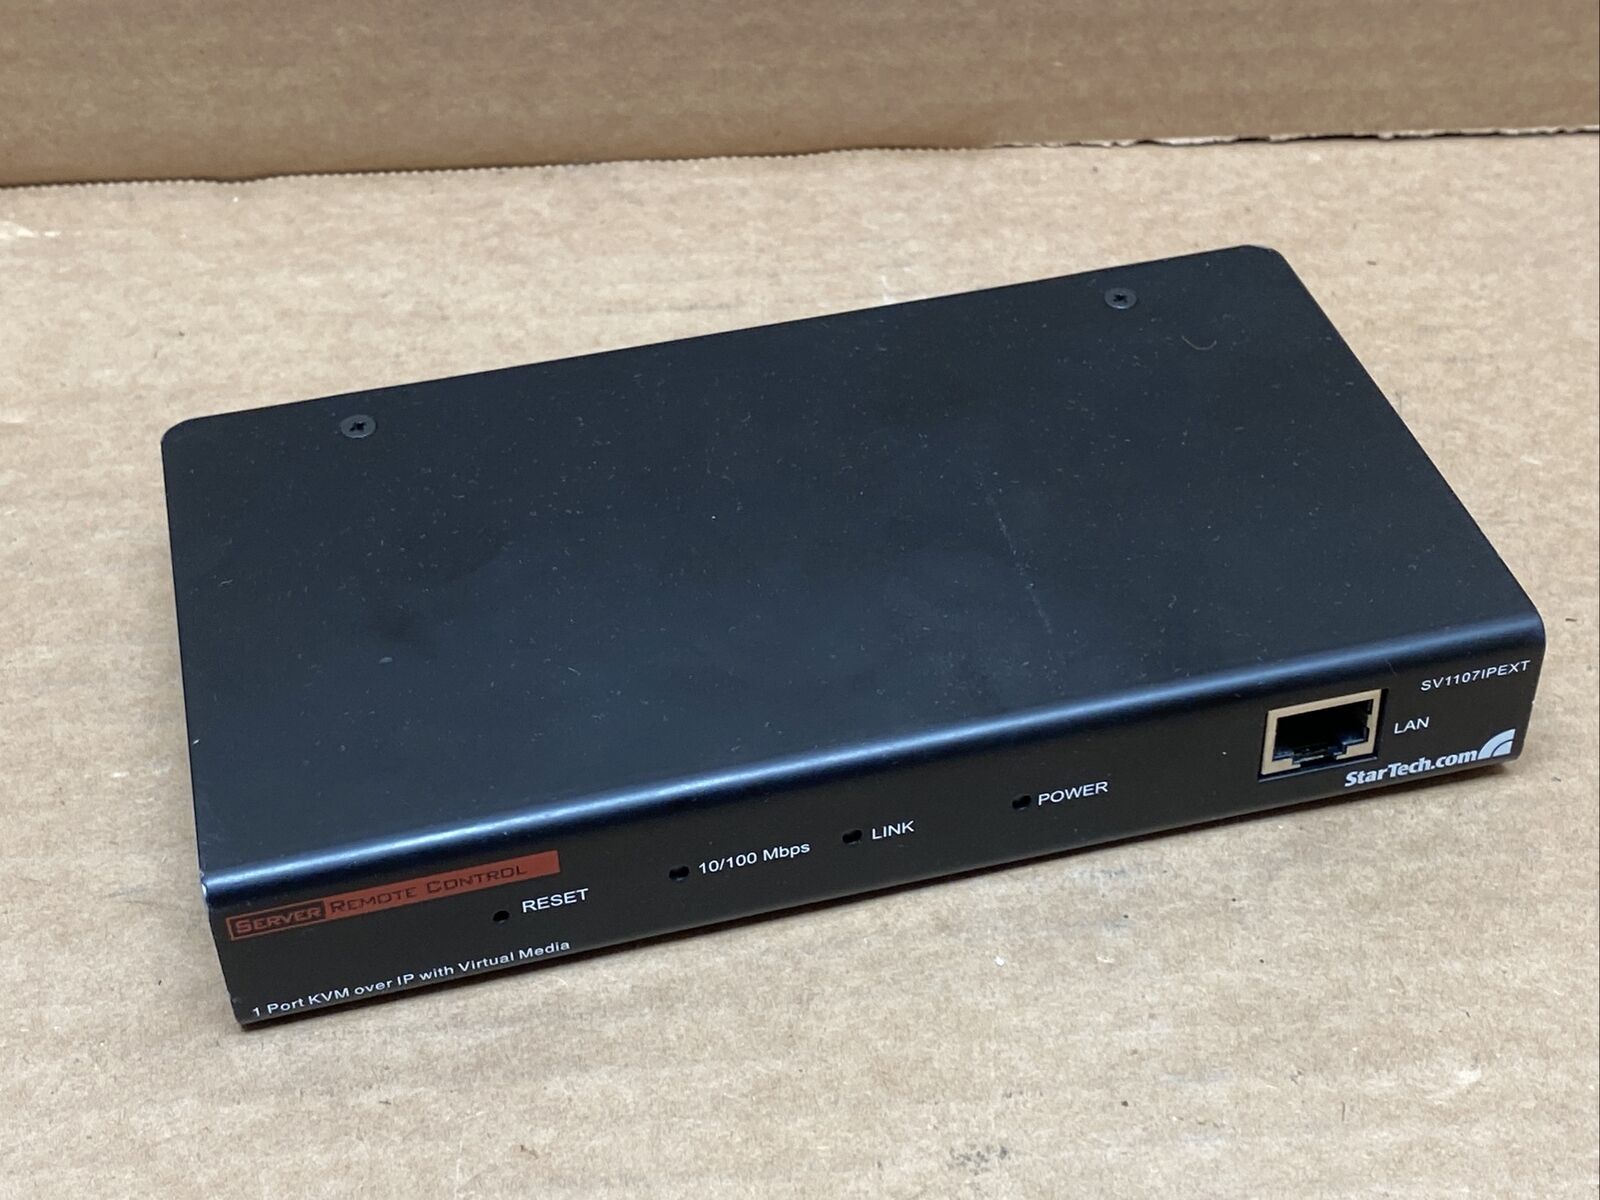 StarTech 1-Port Remote Control KVM Over IP with Virtual Media SV1107IPEXT